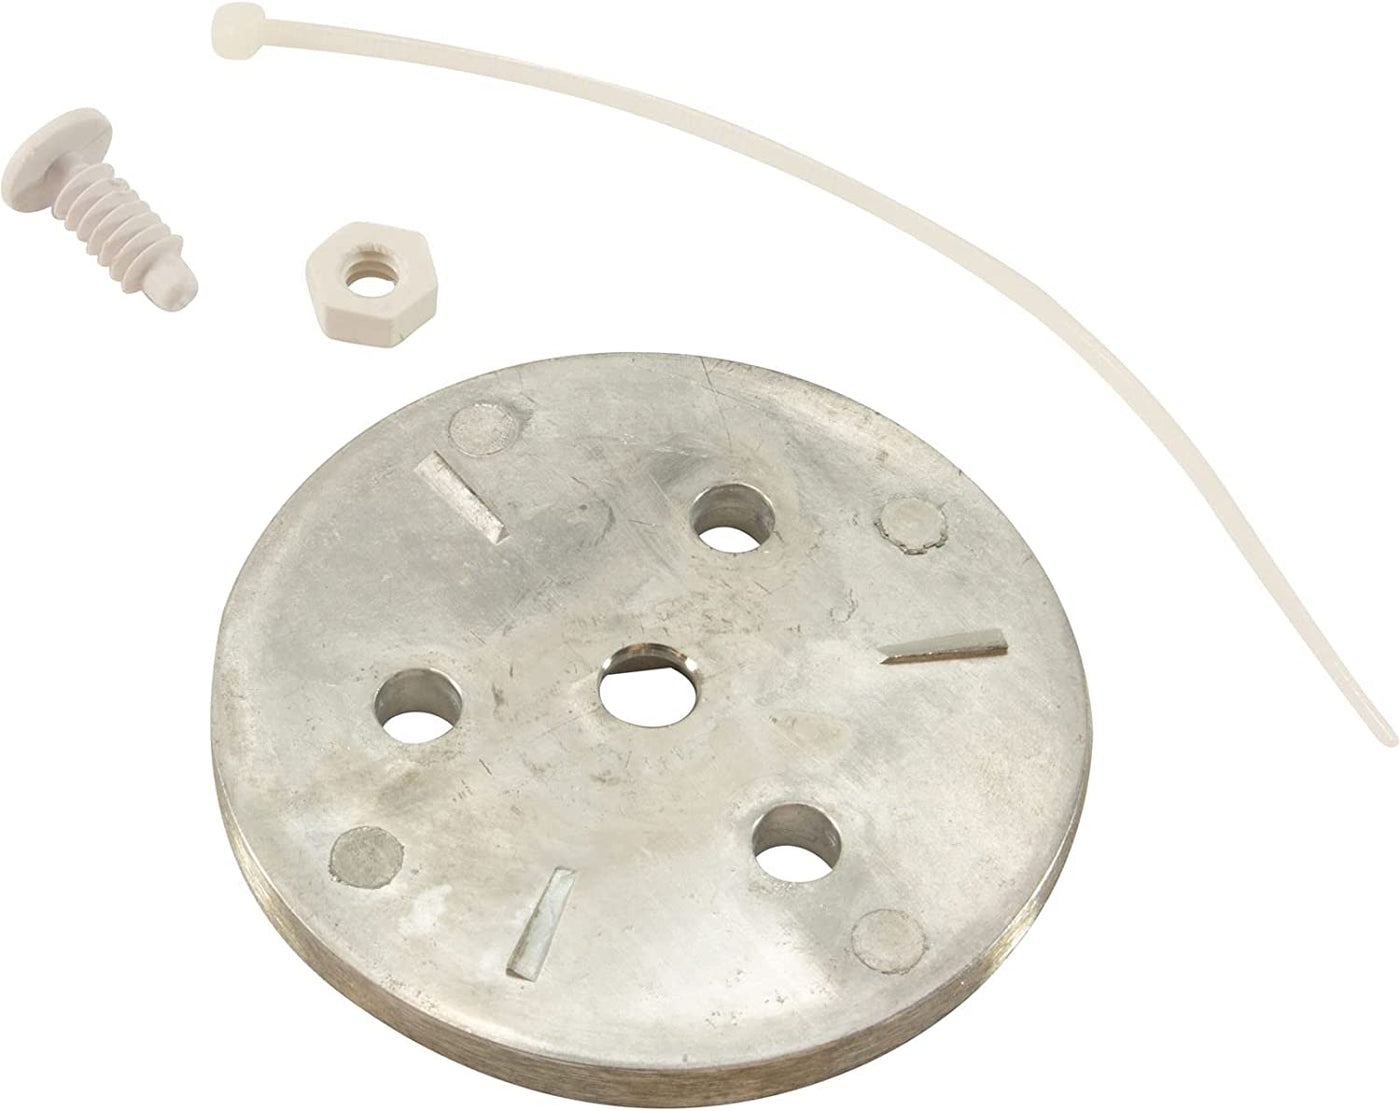 25810-009-950 CMP Zinc Anode "Puck" For Skimmer Baskets, Helps Fight Galvanic Corrosion